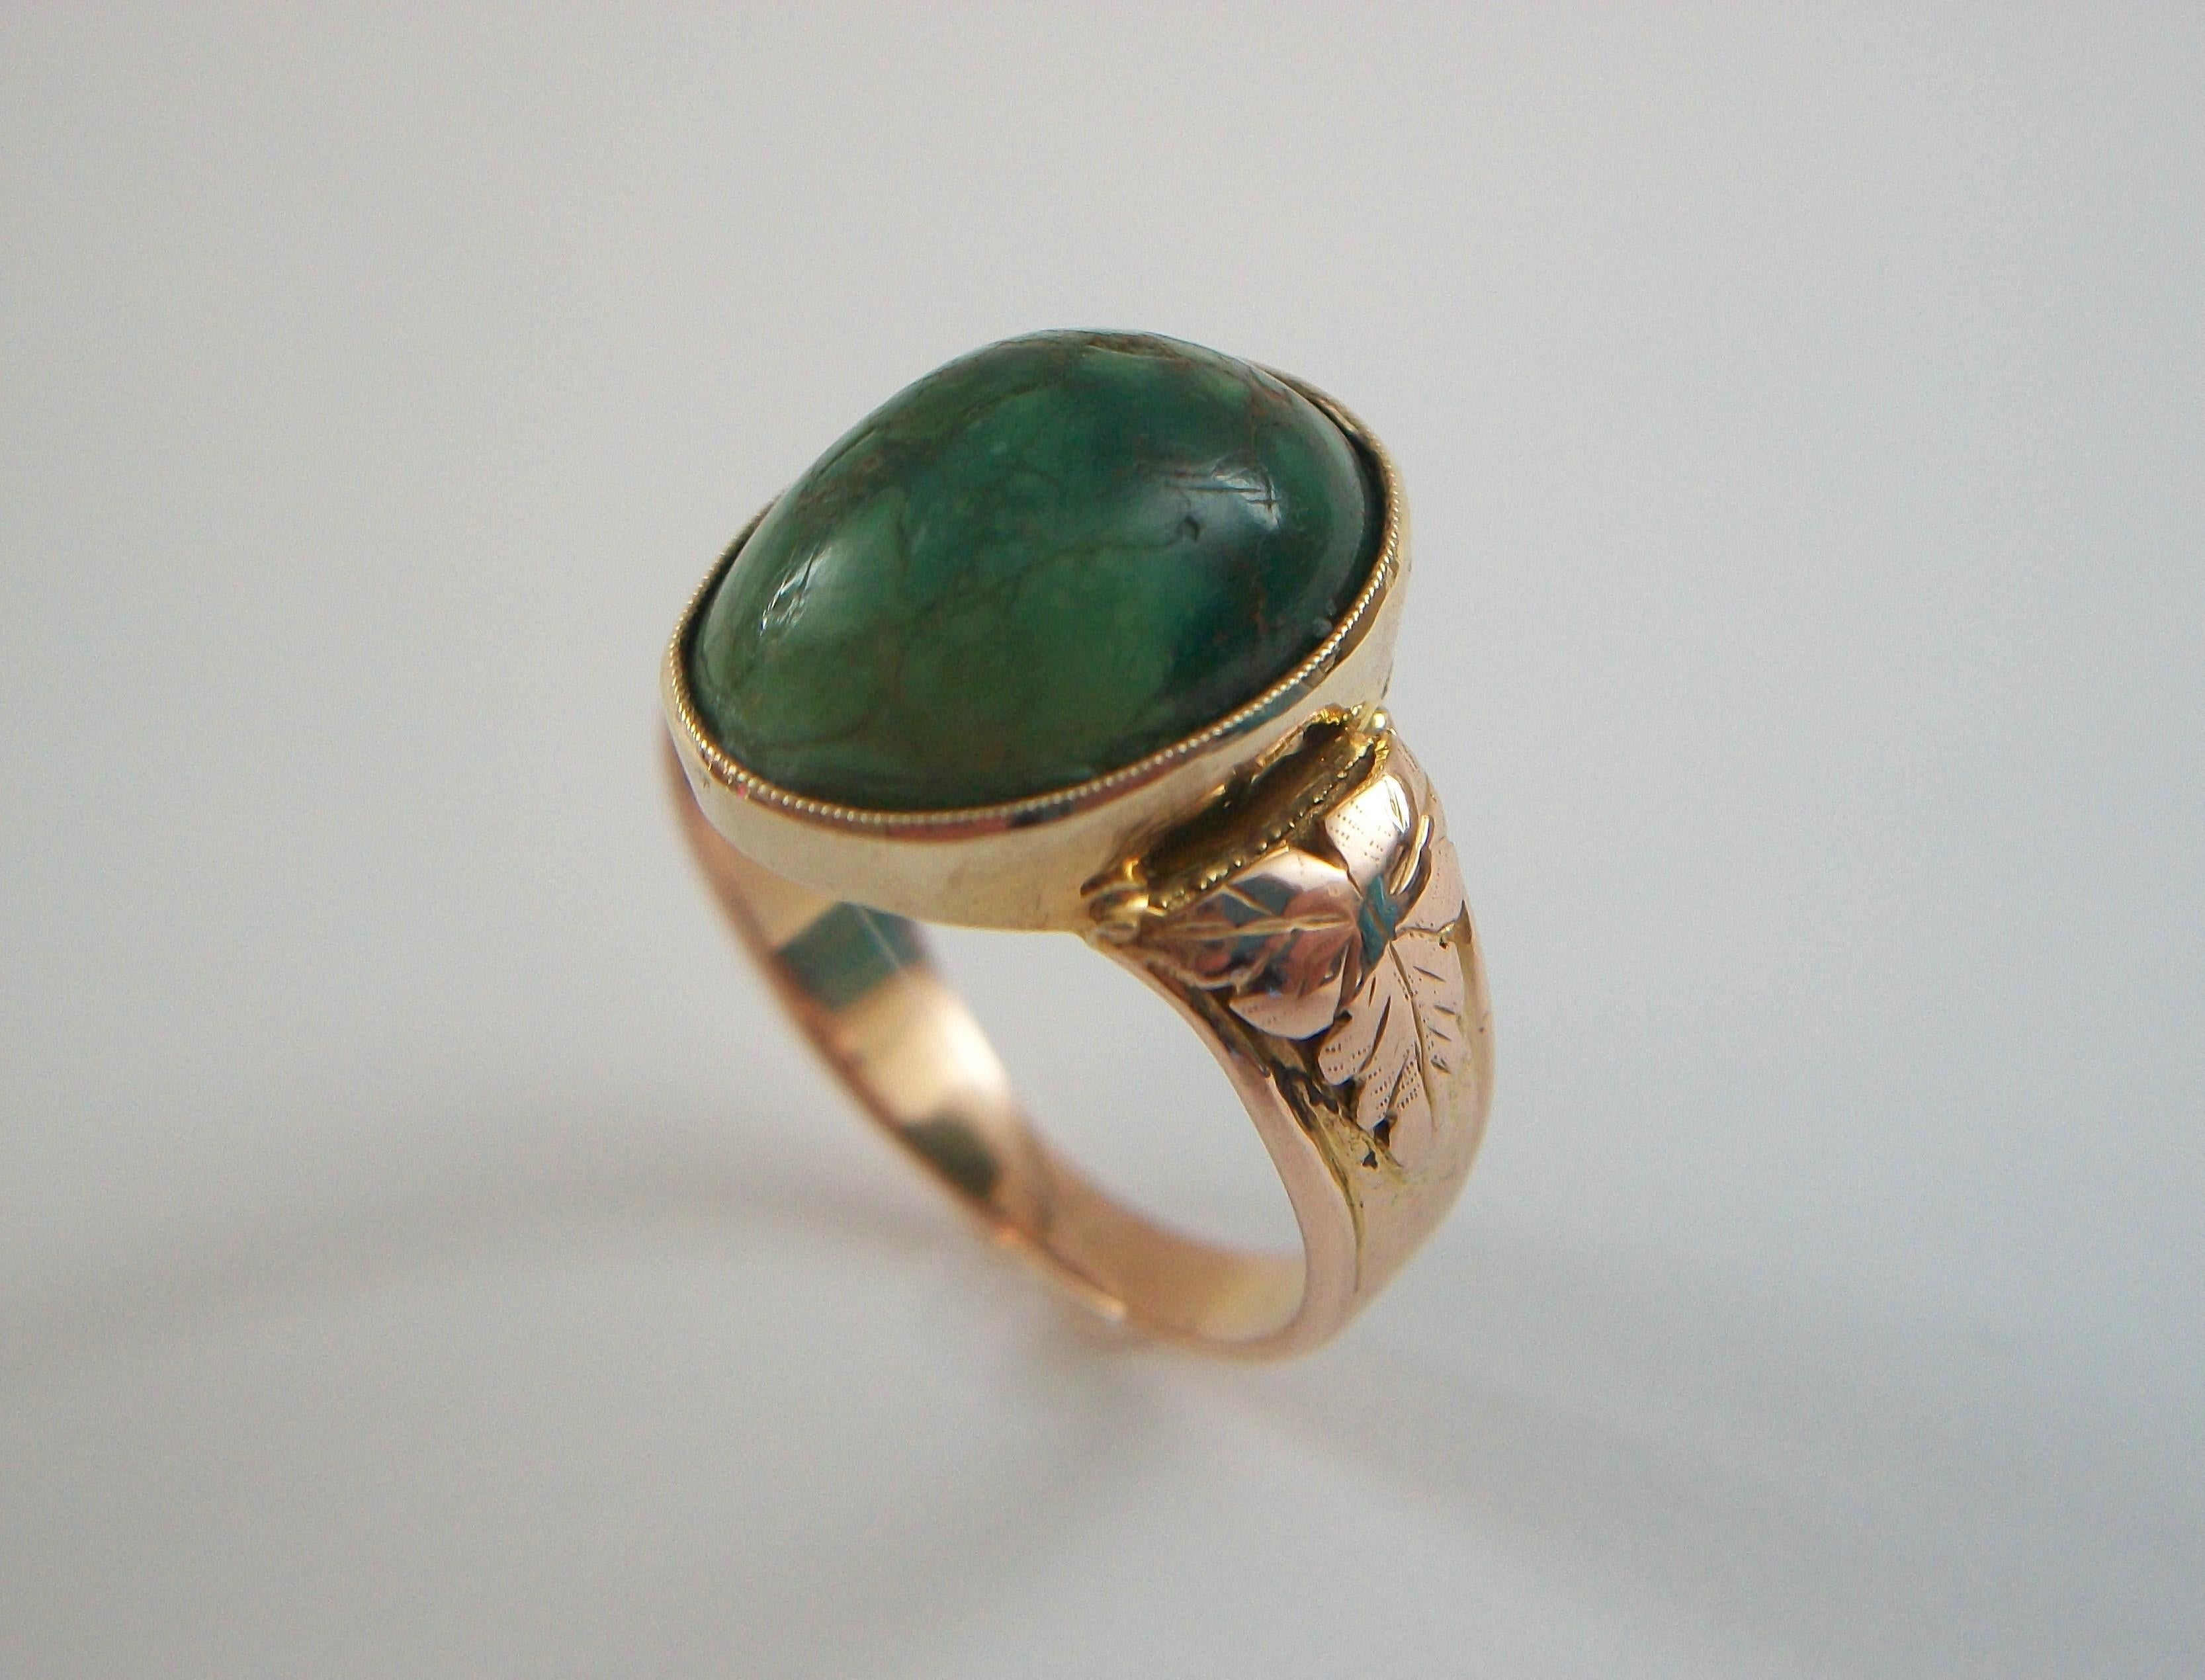 Victorian Cabochon Turquoise & 18K Gold Ring - United Kingdom - Circa 1900 In Good Condition For Sale In Chatham, CA